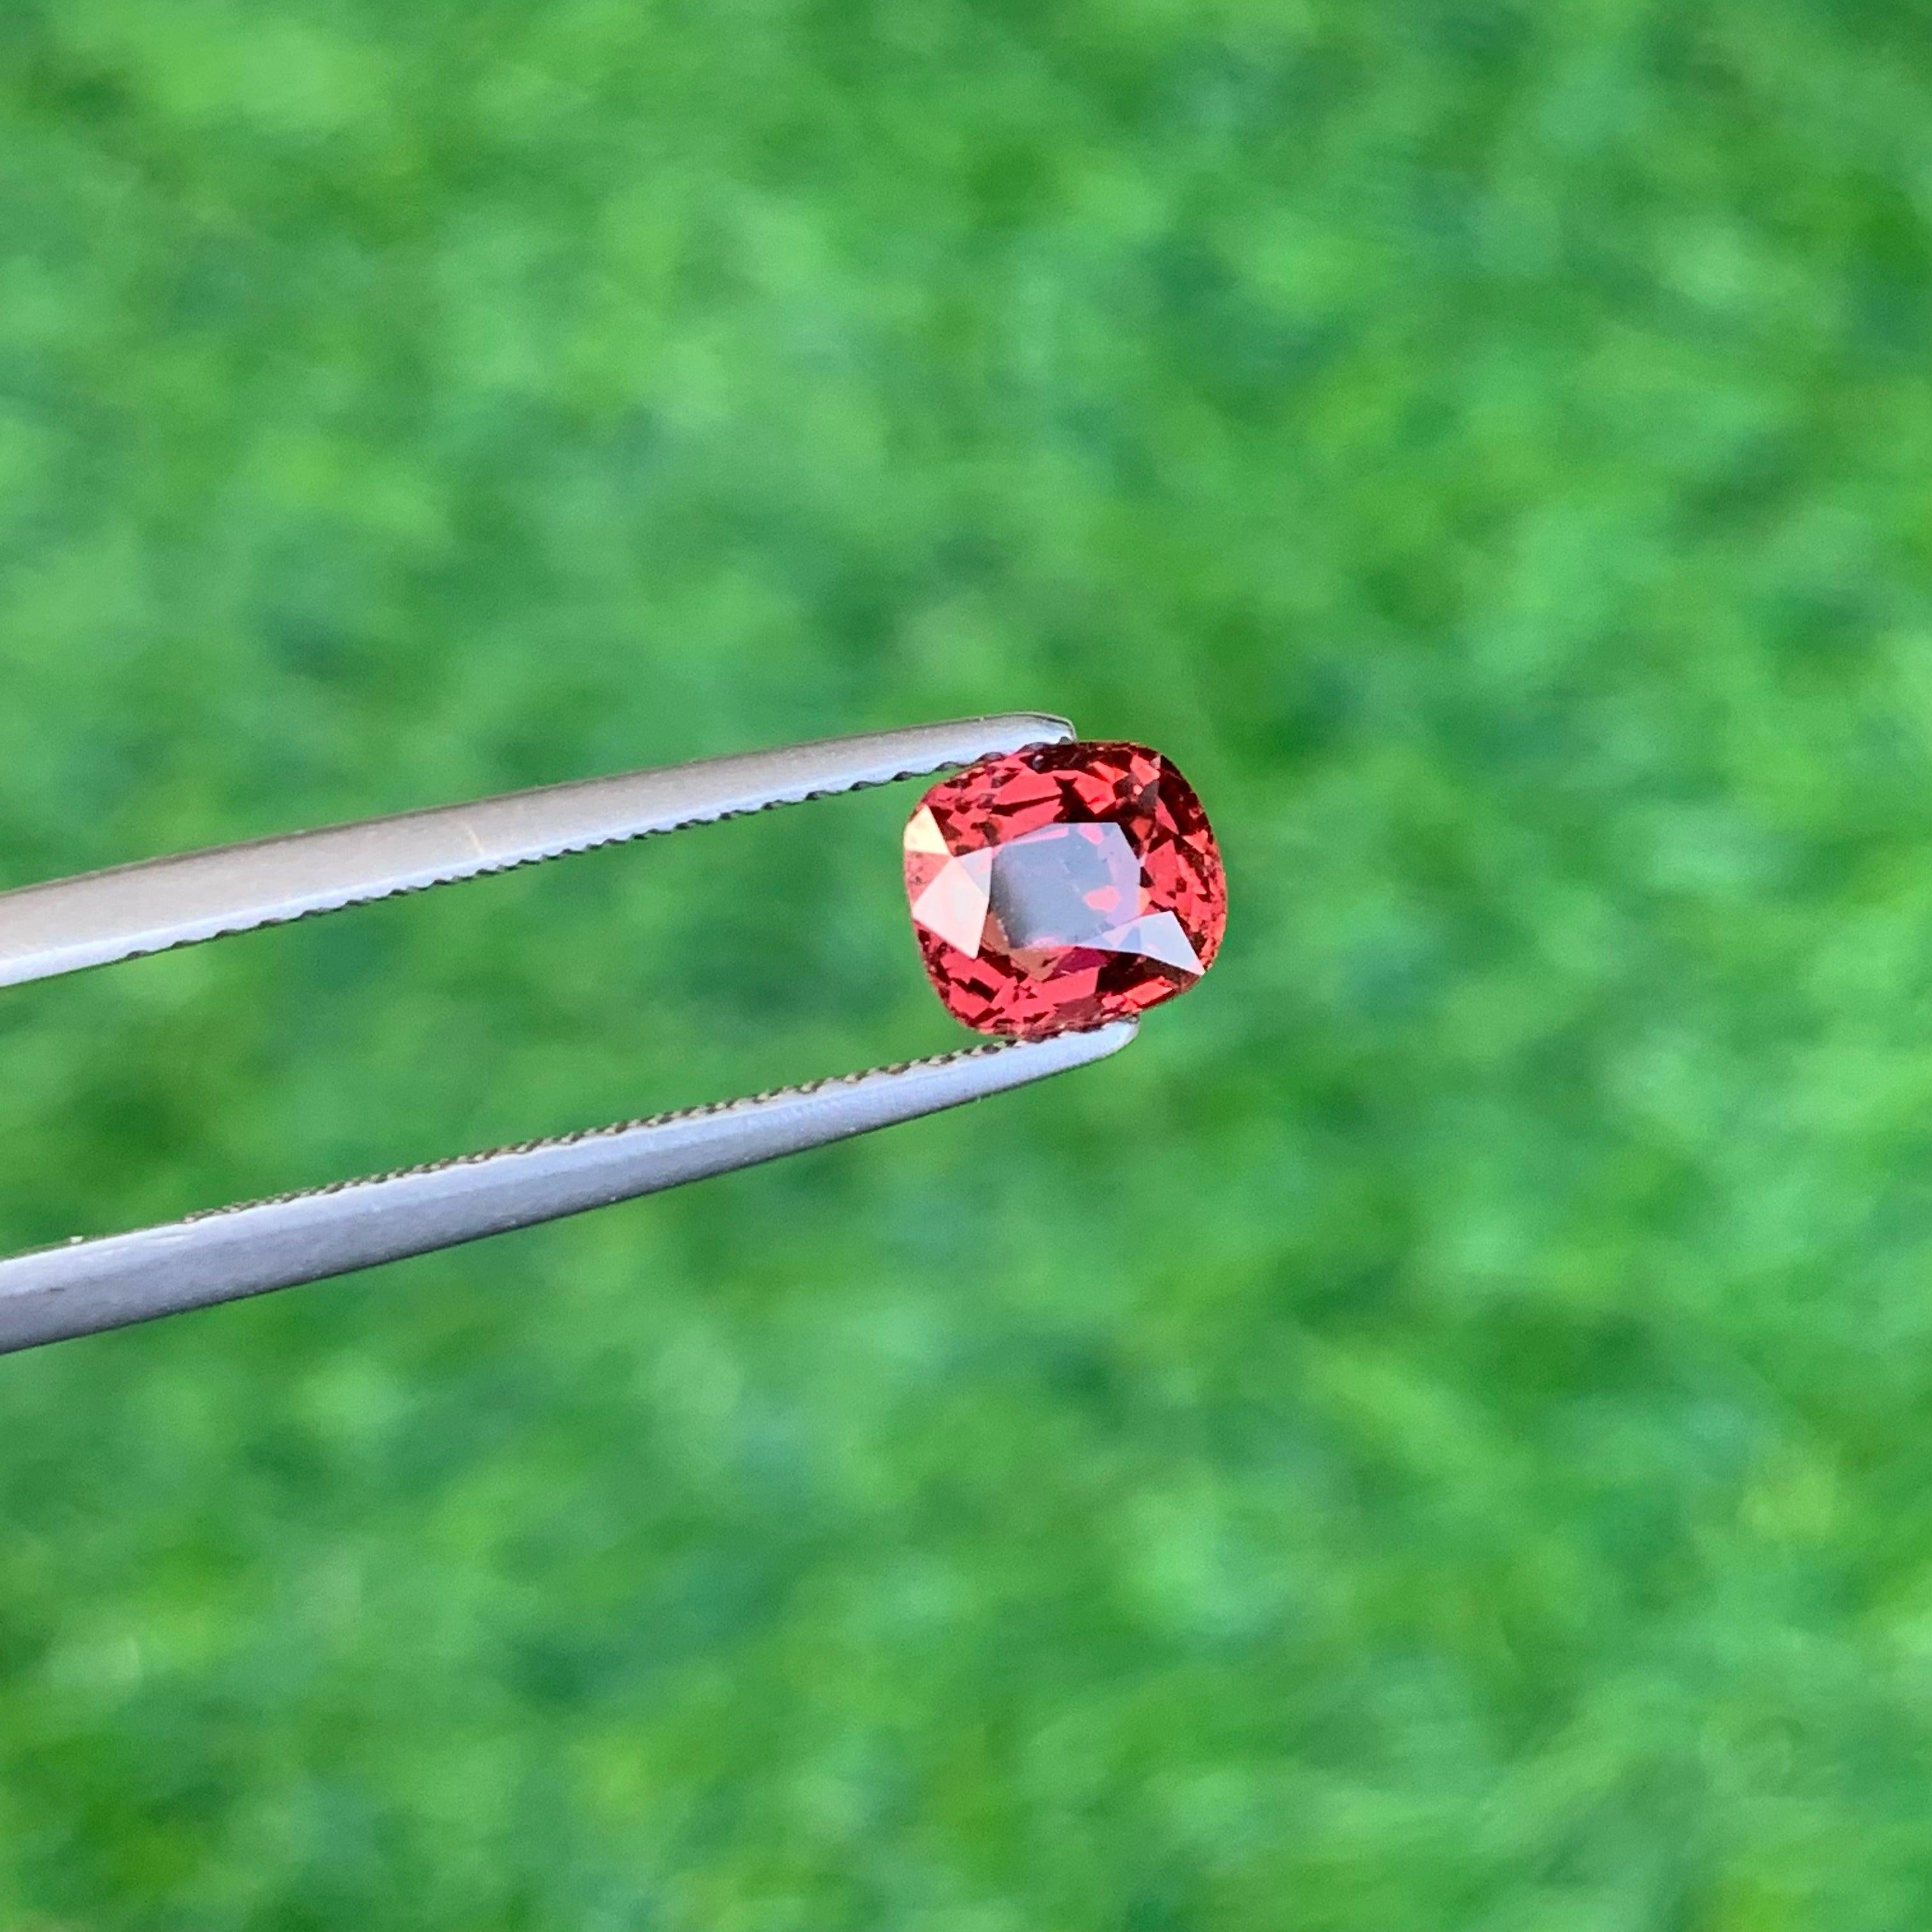 Modern Majestic Orange Red Spinal Cut Gemstone 1.15 Carats AIG Certified Spinel Stone For Sale